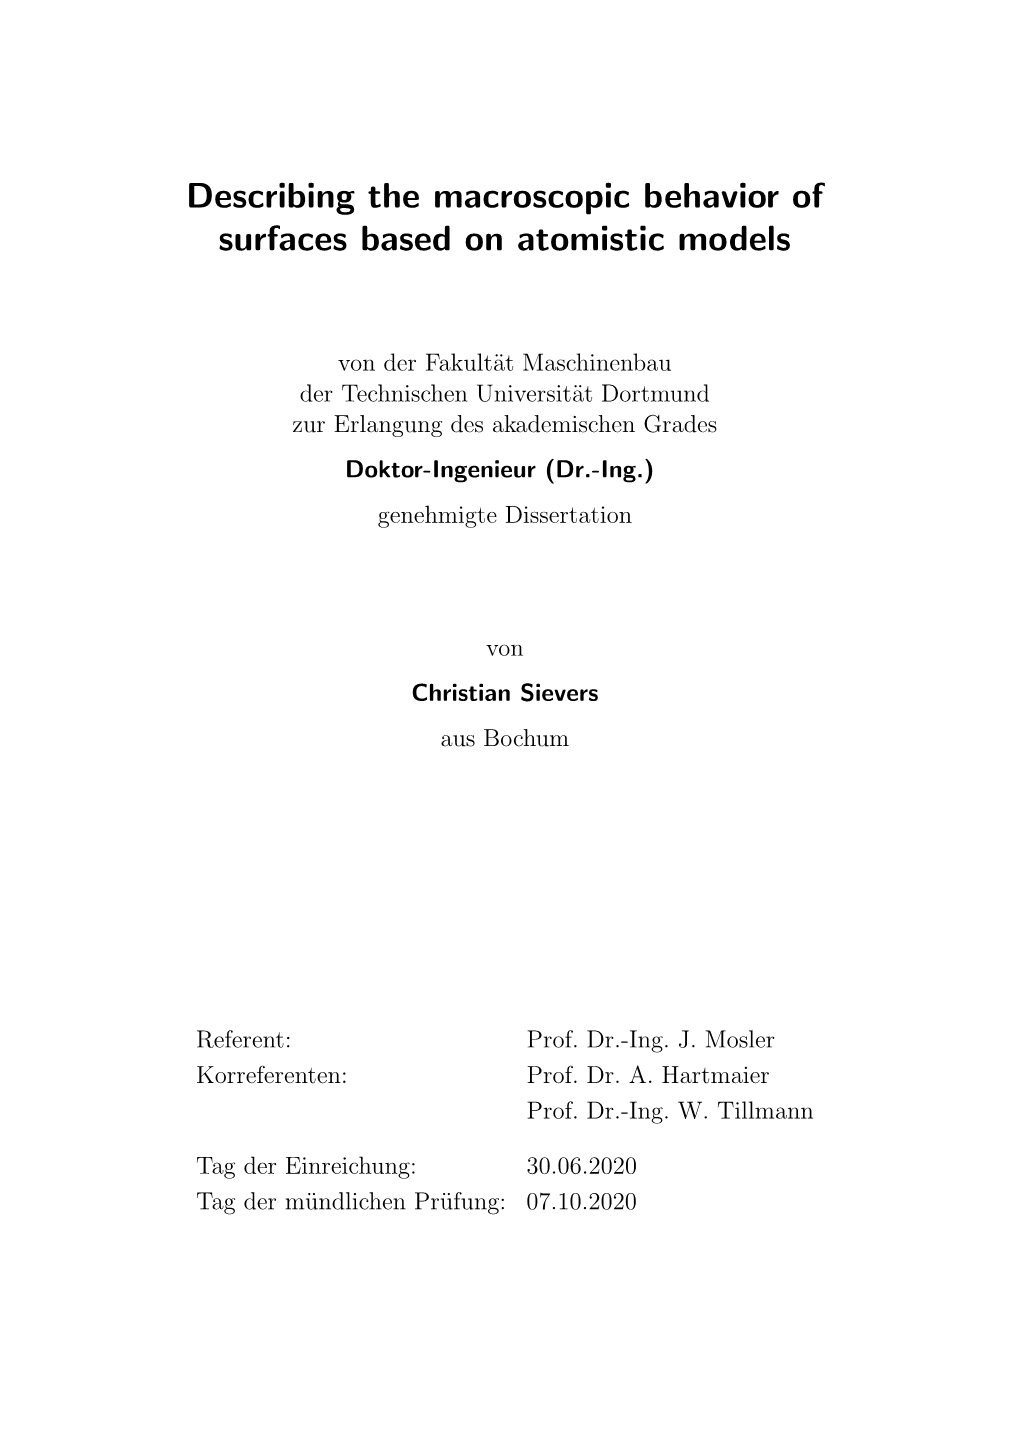 Describing the Macroscopic Behavior of Surfaces Based on Atomistic Models